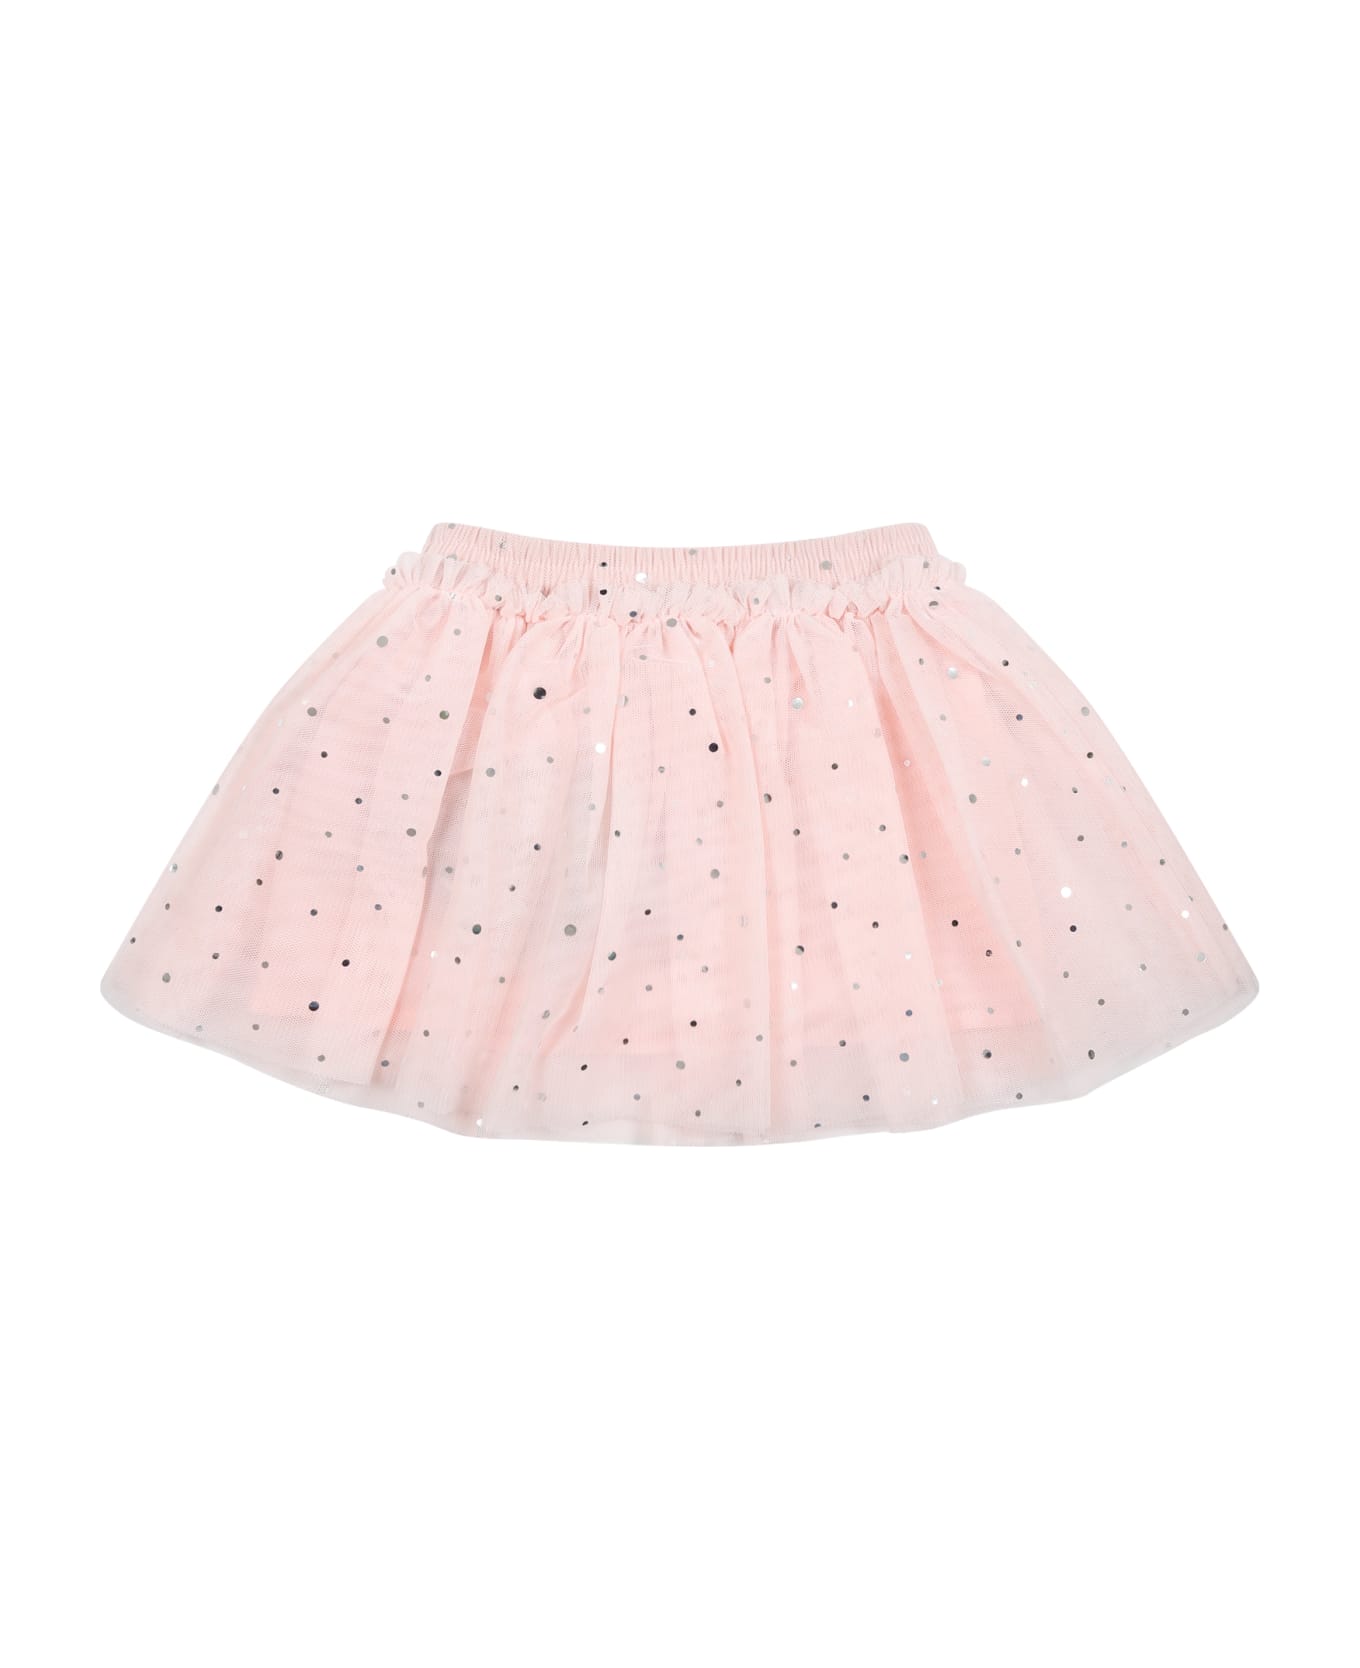 Stella McCartney Kids Pink Skirt For Baby Girl With Sequins - Pink